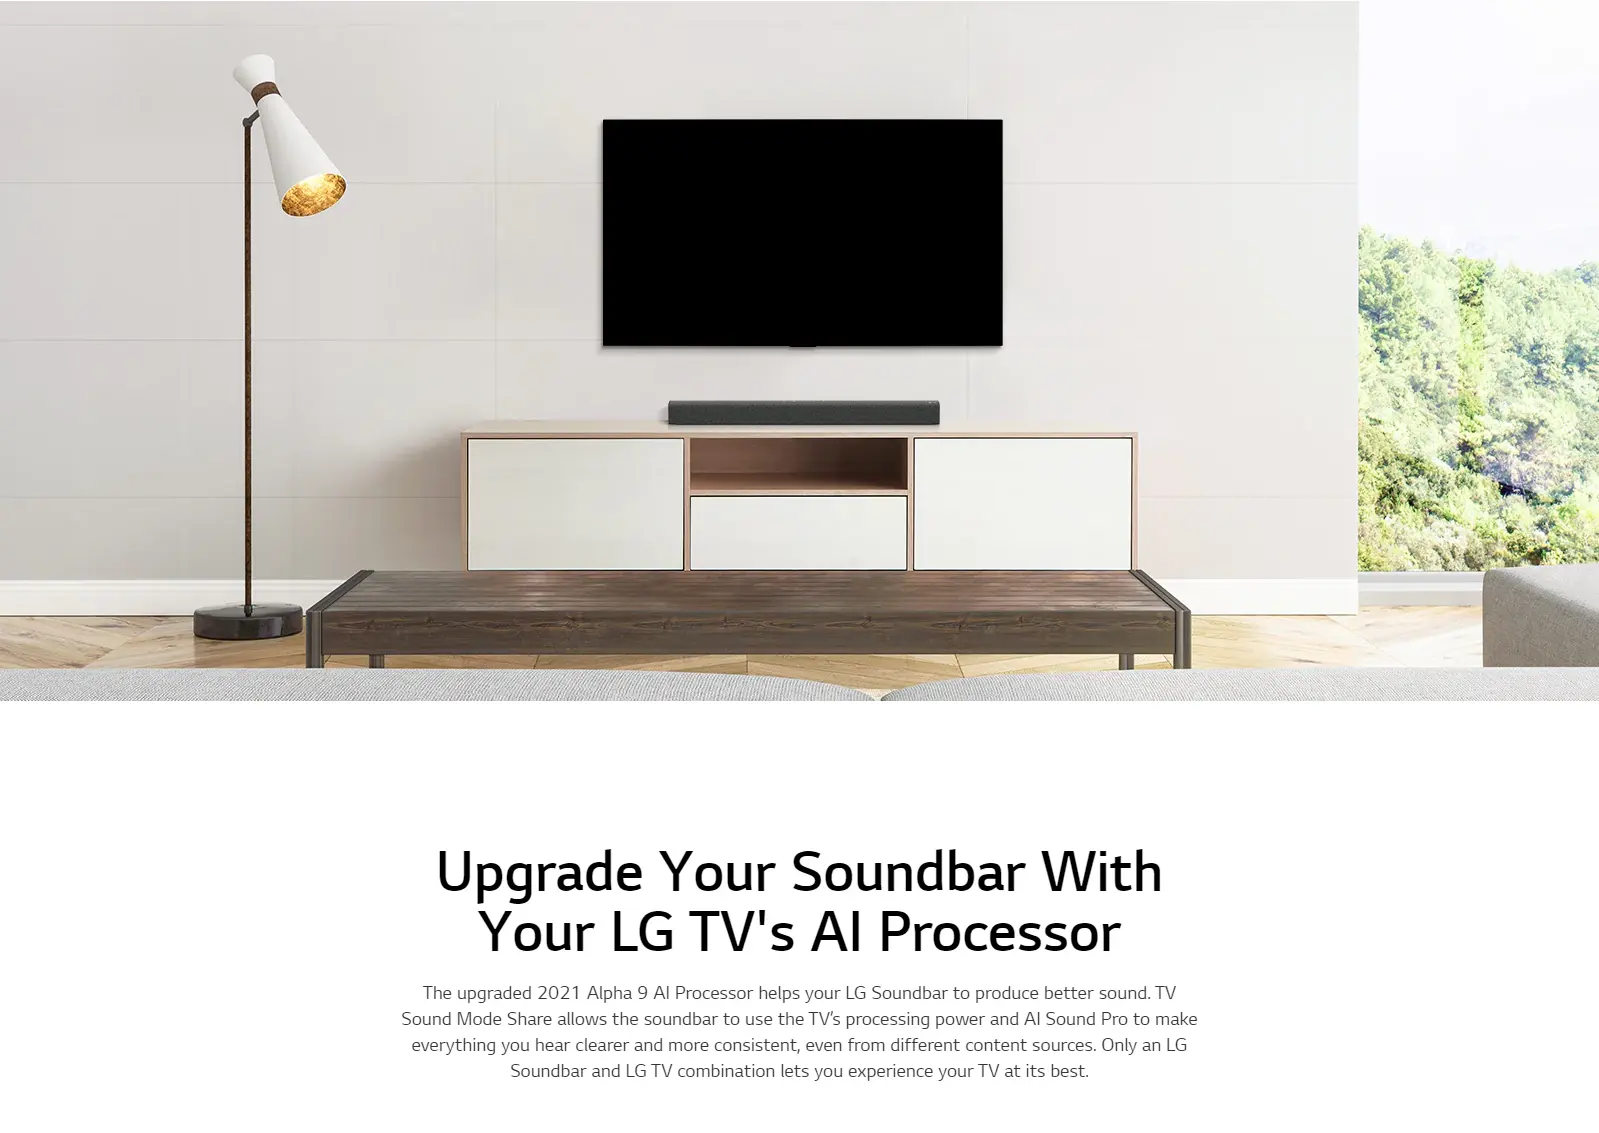 LG Soundbar Truly Immersive 2.1 Channel Sound, Powerful Bass With A Built-In Subwoofer